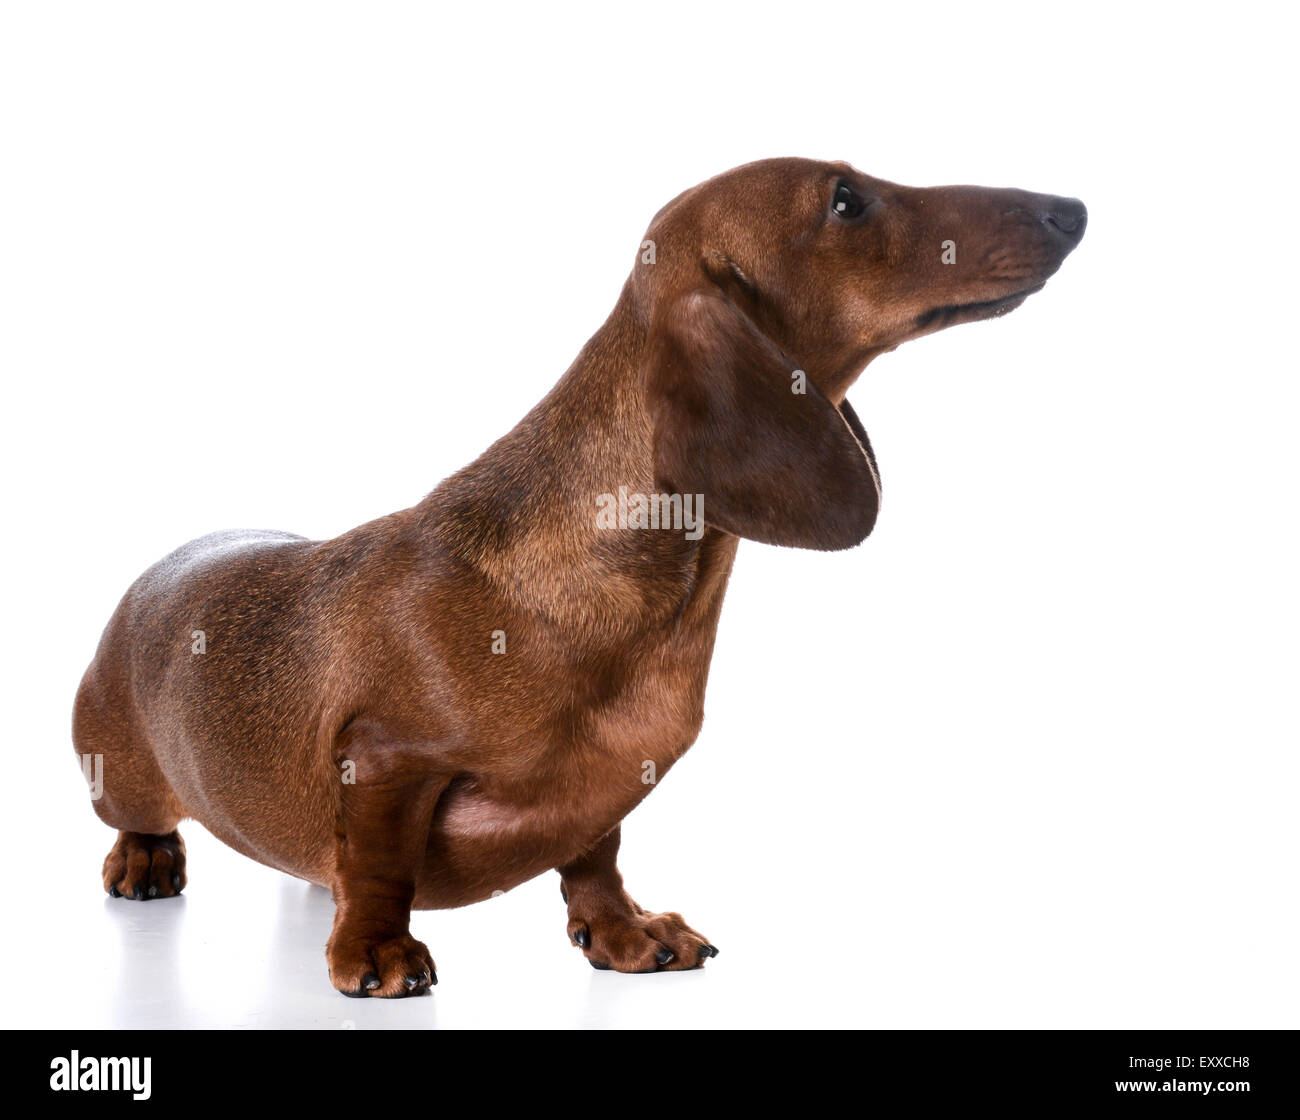 miniature smooth dachshund standing on white background Stock Photo